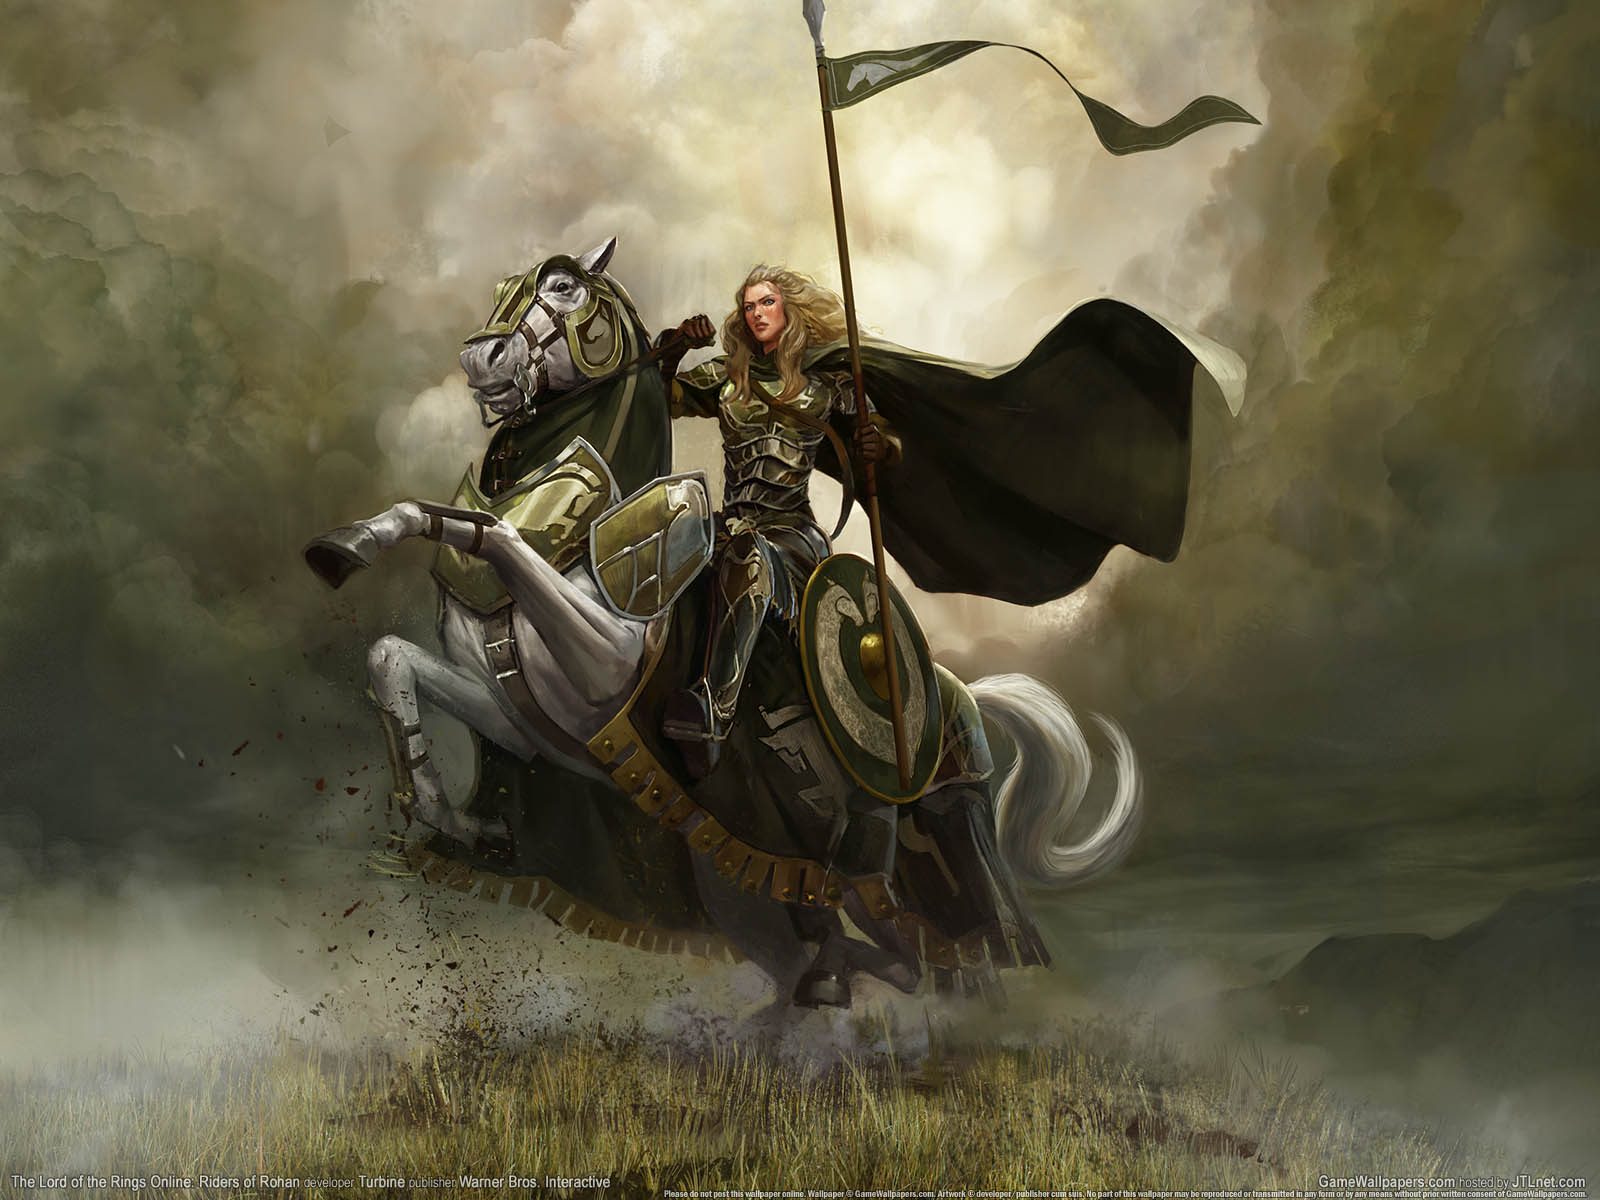 The Lord of the Rings Online%3A Riders of Rohan achtergrond 02 1600x1200